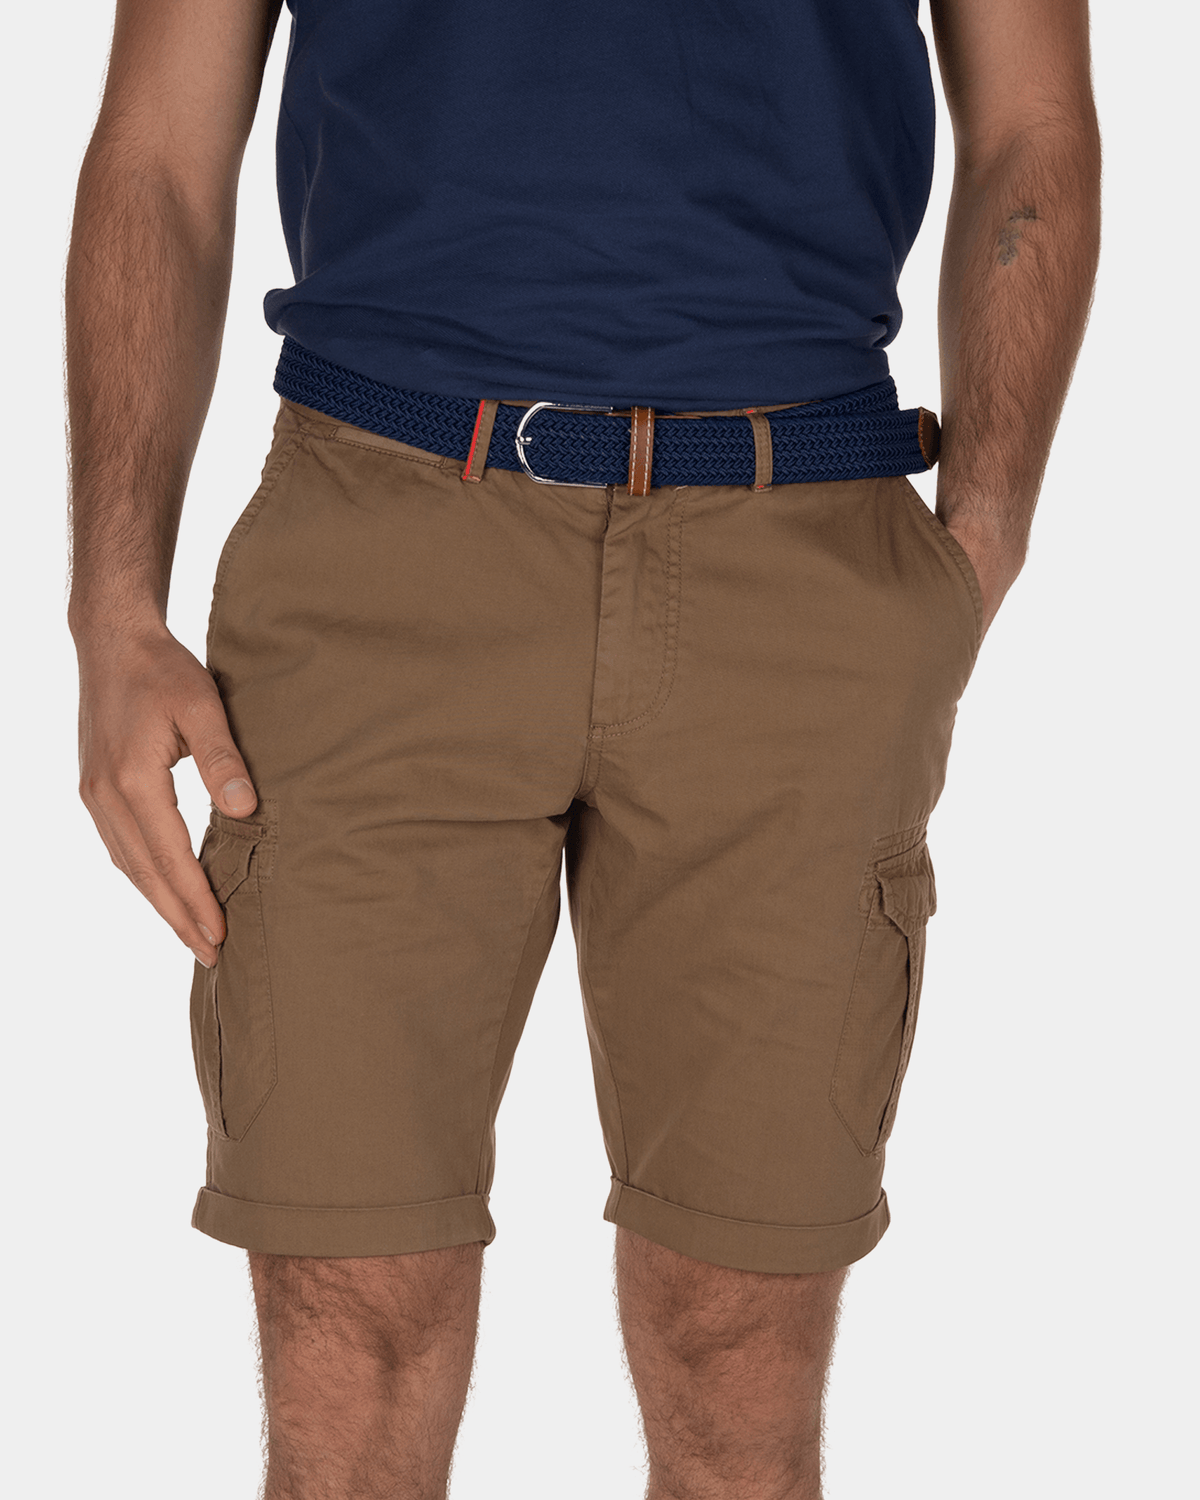 Larry Bay cargo shorts - Tobacco Brown